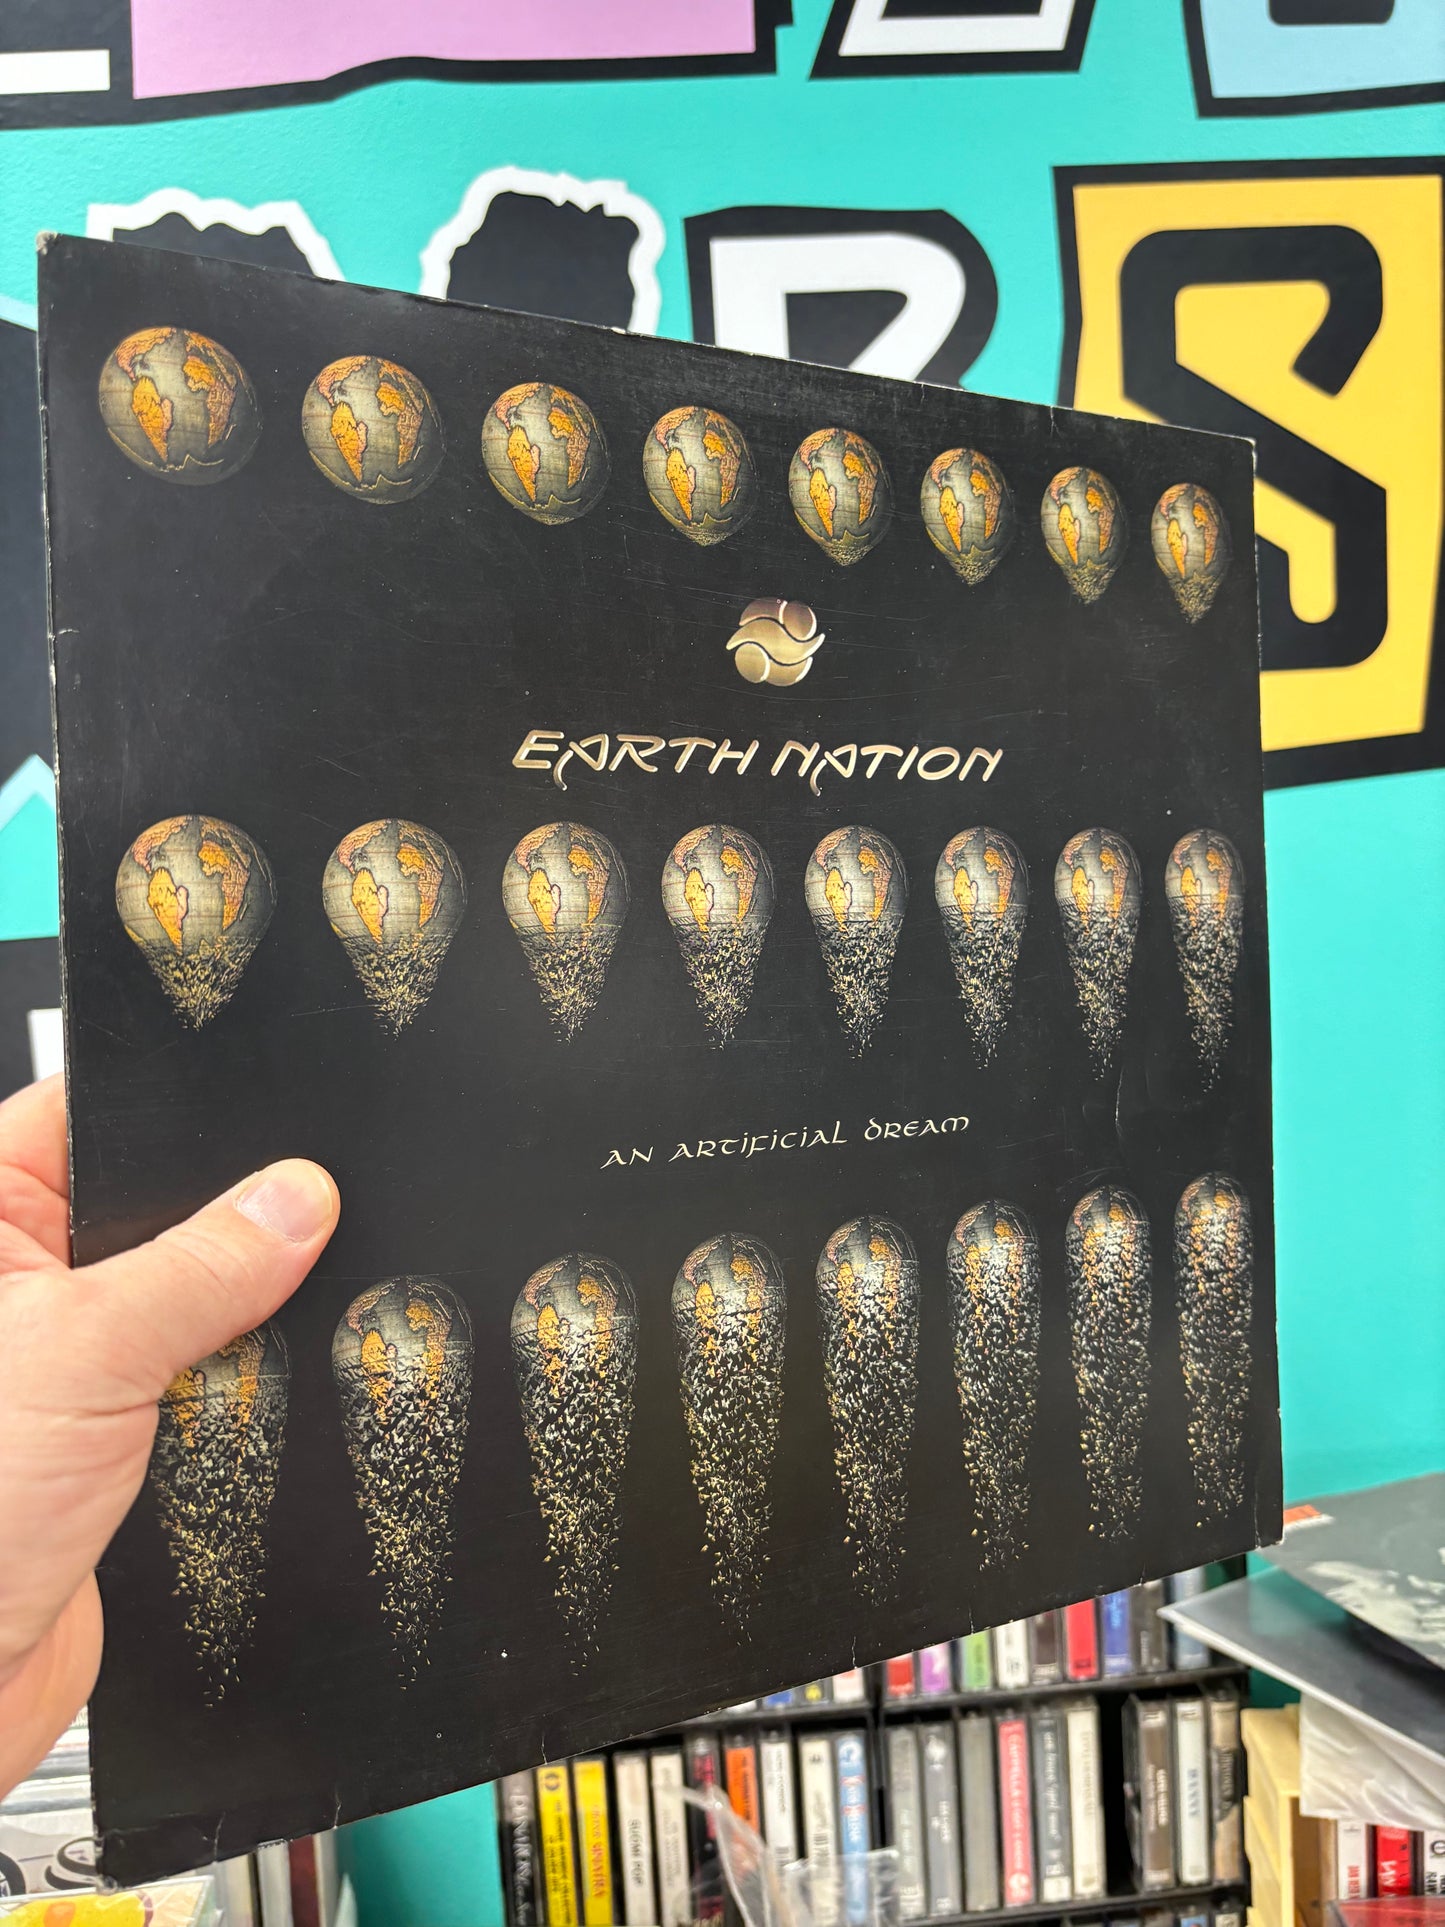 Earth Nation: An Artificial Dream, 12inch, Eye Q Records, UK & Europe 1995